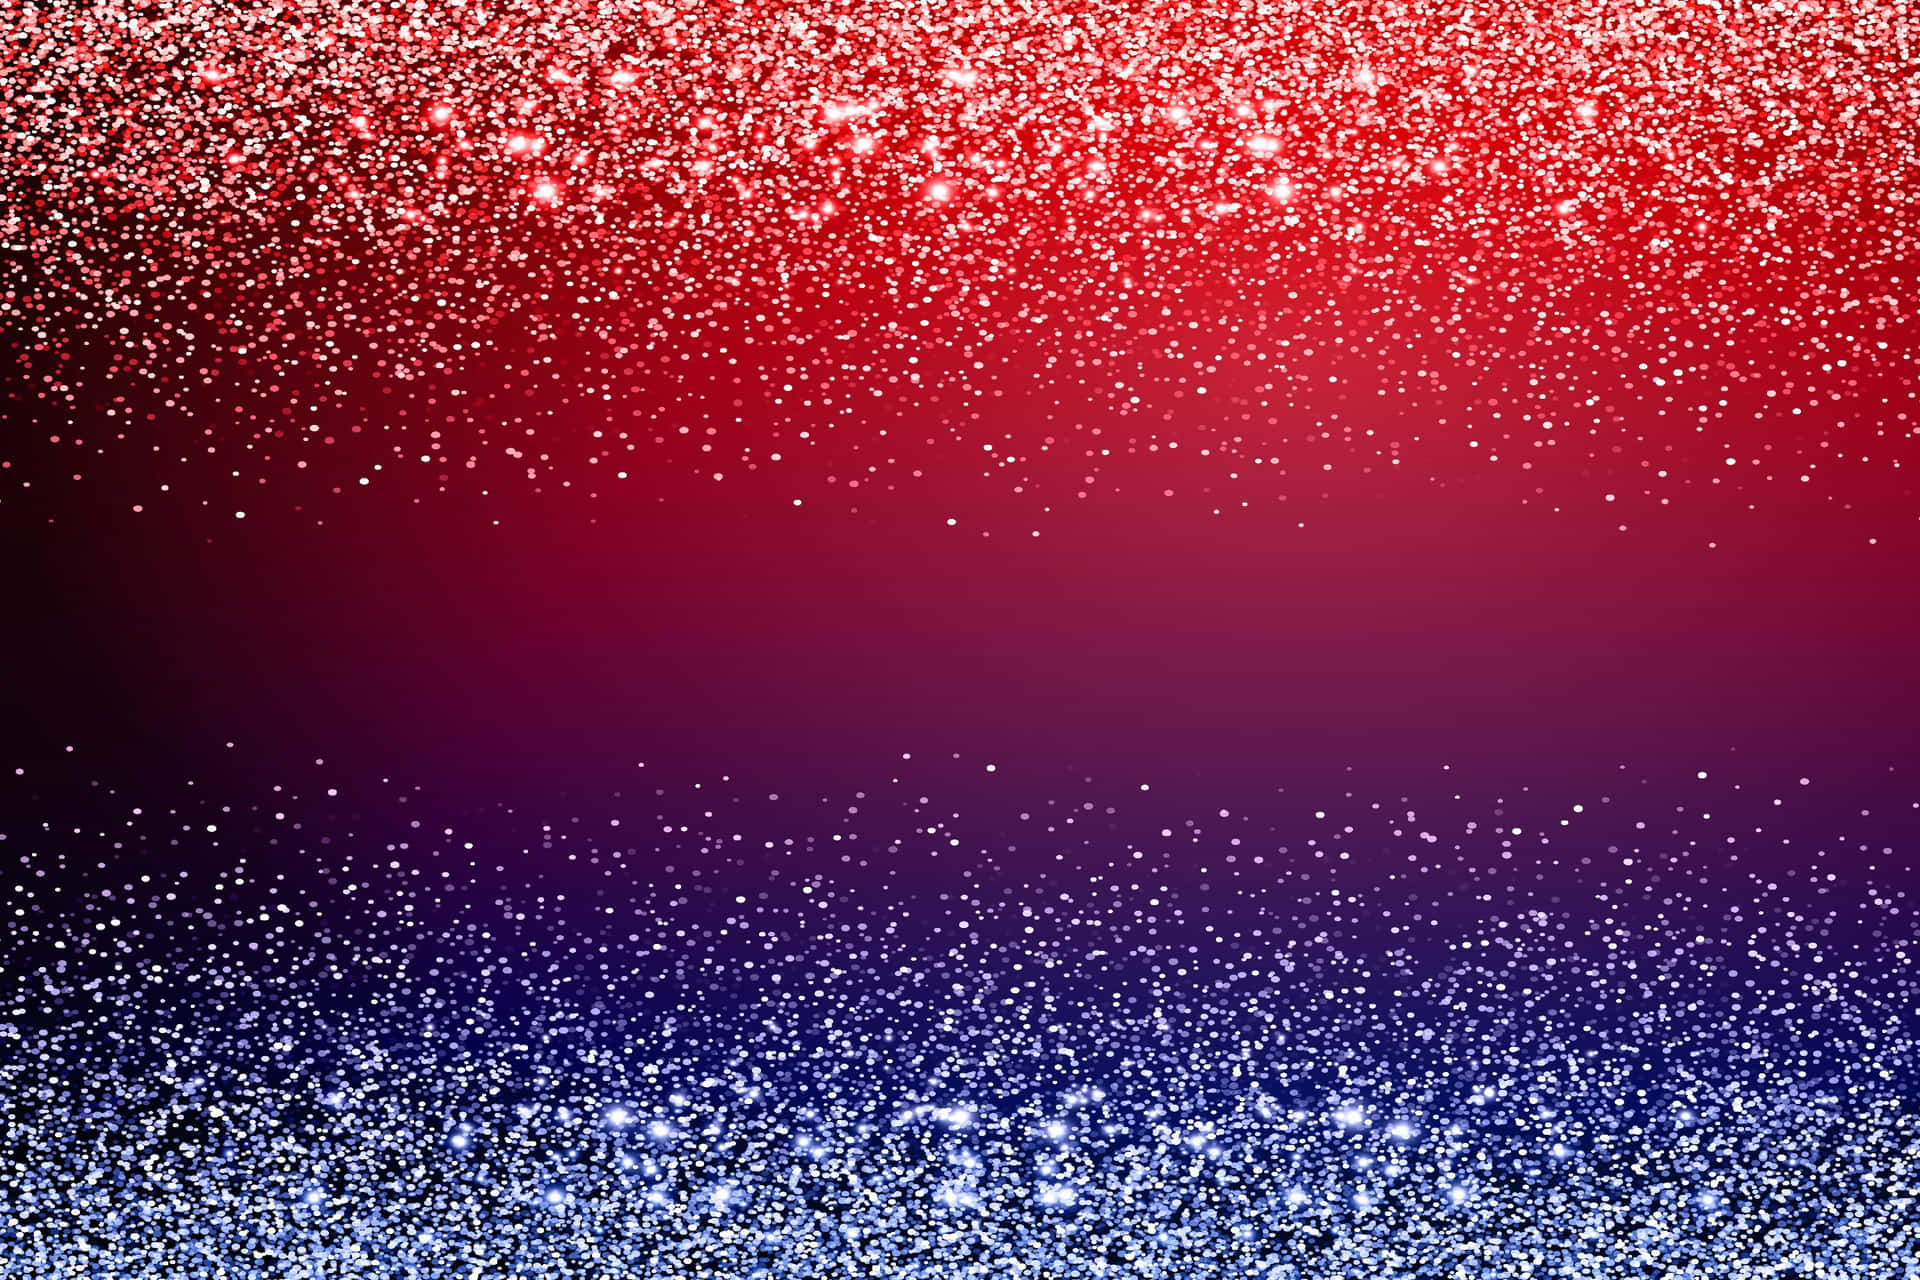 Sparkly Blue Background And Red